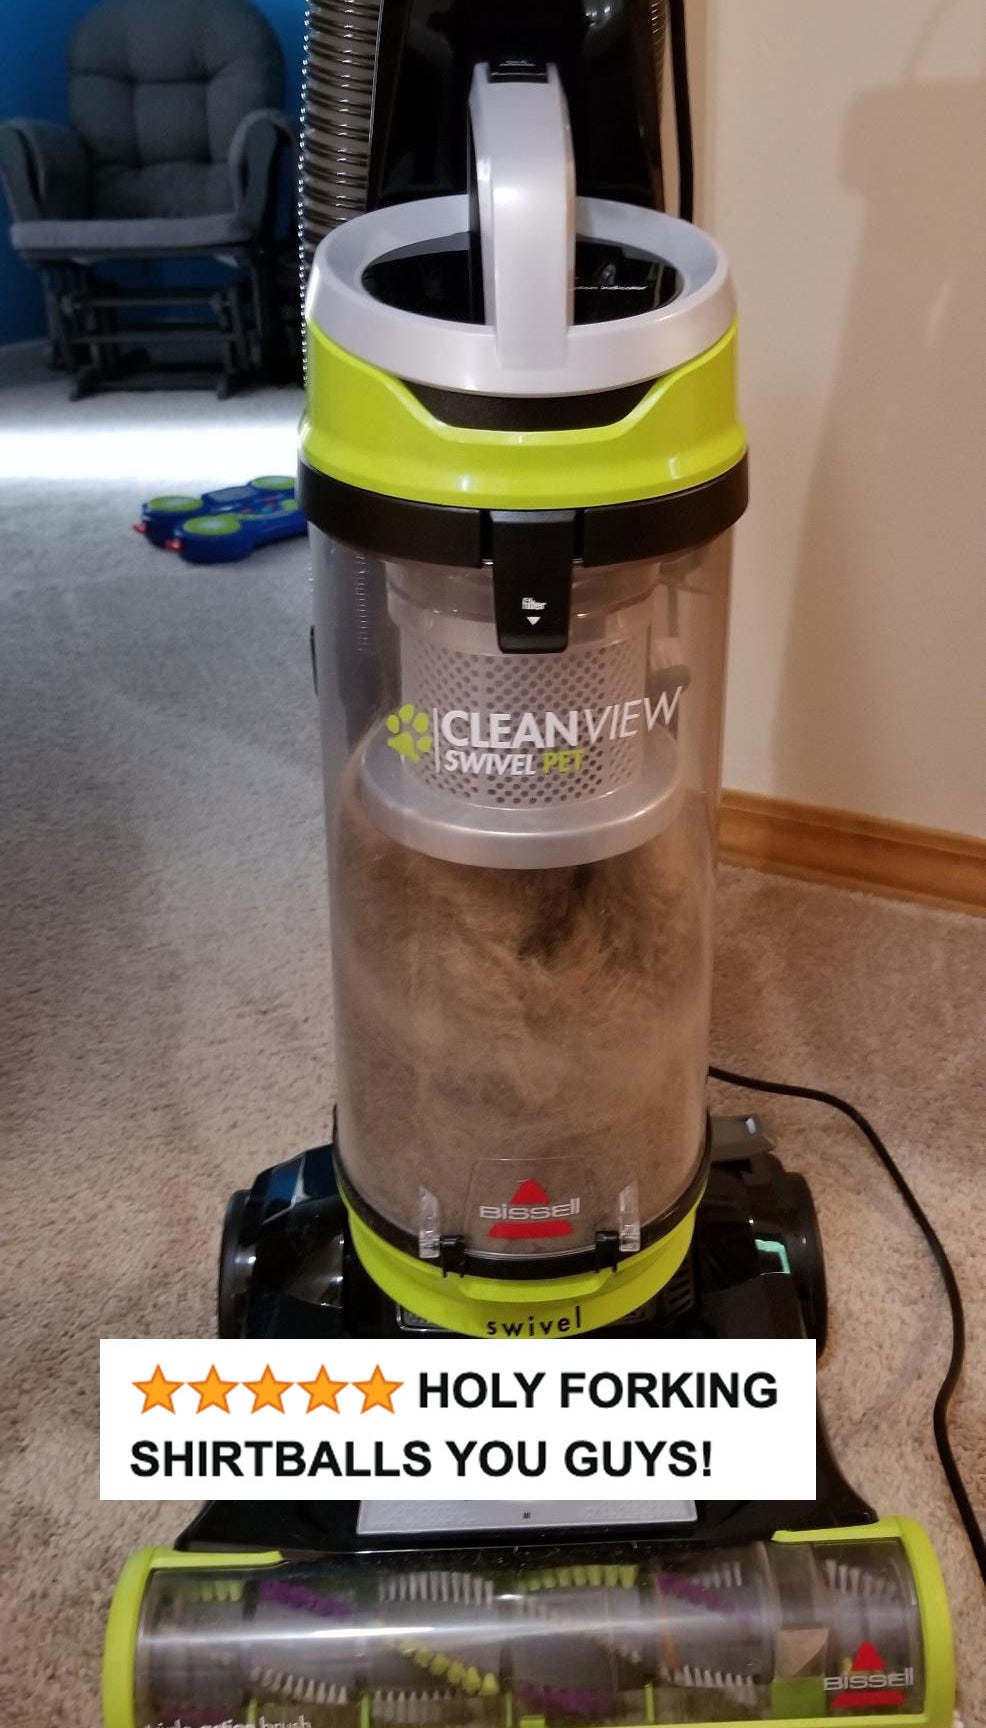 The vacuum filled with pet hair and dust with five stars and review text &quot;holy forking shirtballs you guys!&quot;